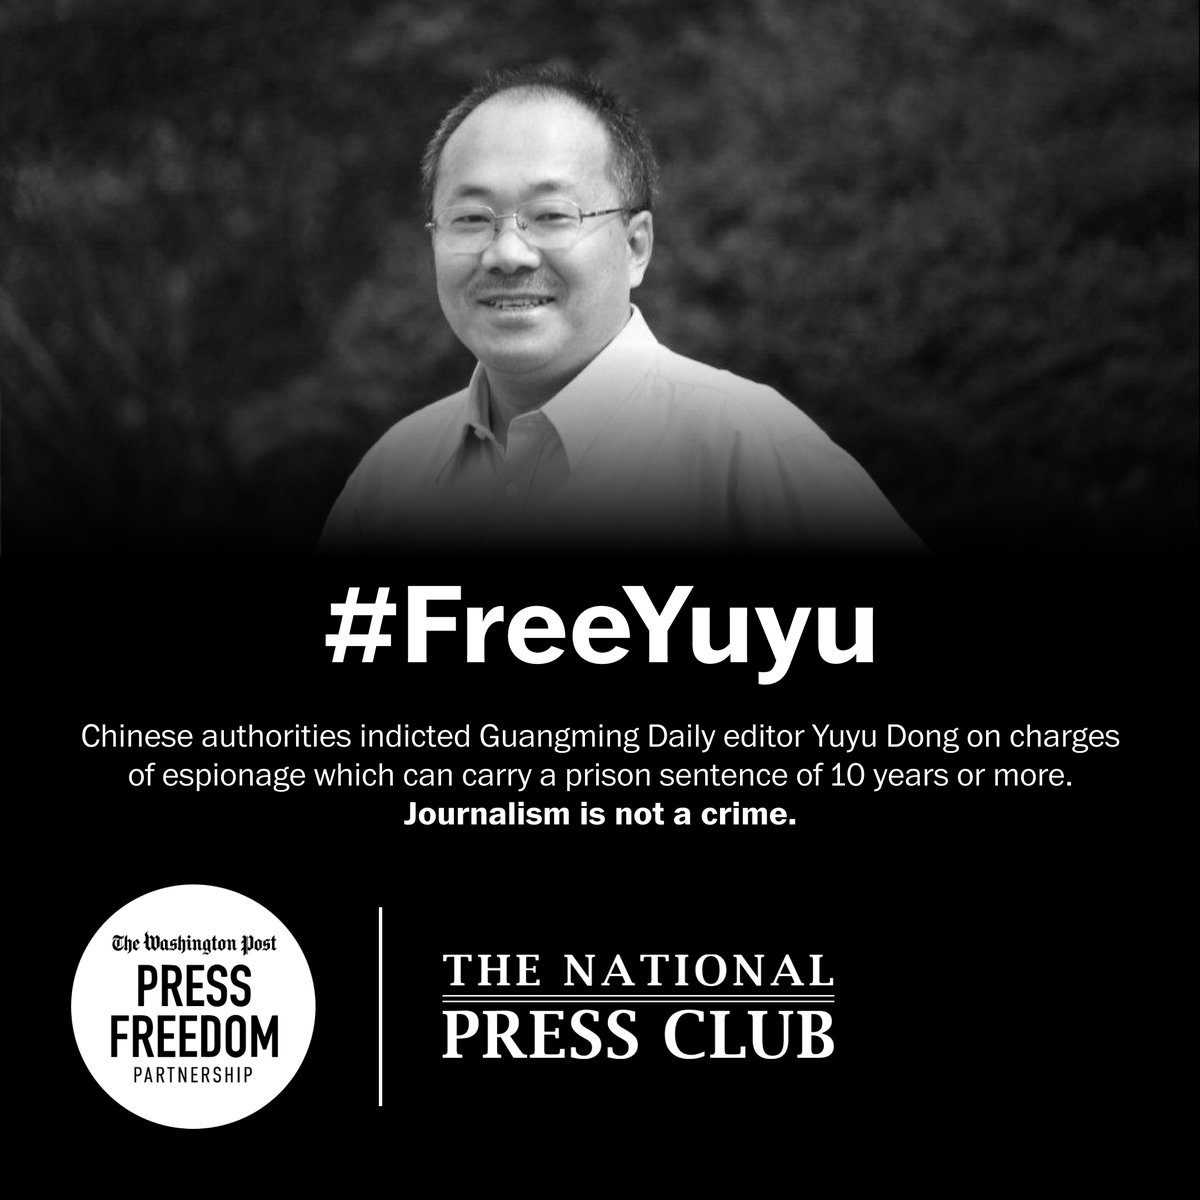 A well-known journalist at Guangming Daily, Yuyu Dong has expressed support for reforms in China. This past March, Mr. Dong was indicted by Chinese authorities on charges of espionage. We urge the Chinese authorities to release Yuyu Dong immediately. #FreeYuyu @PressClubDC